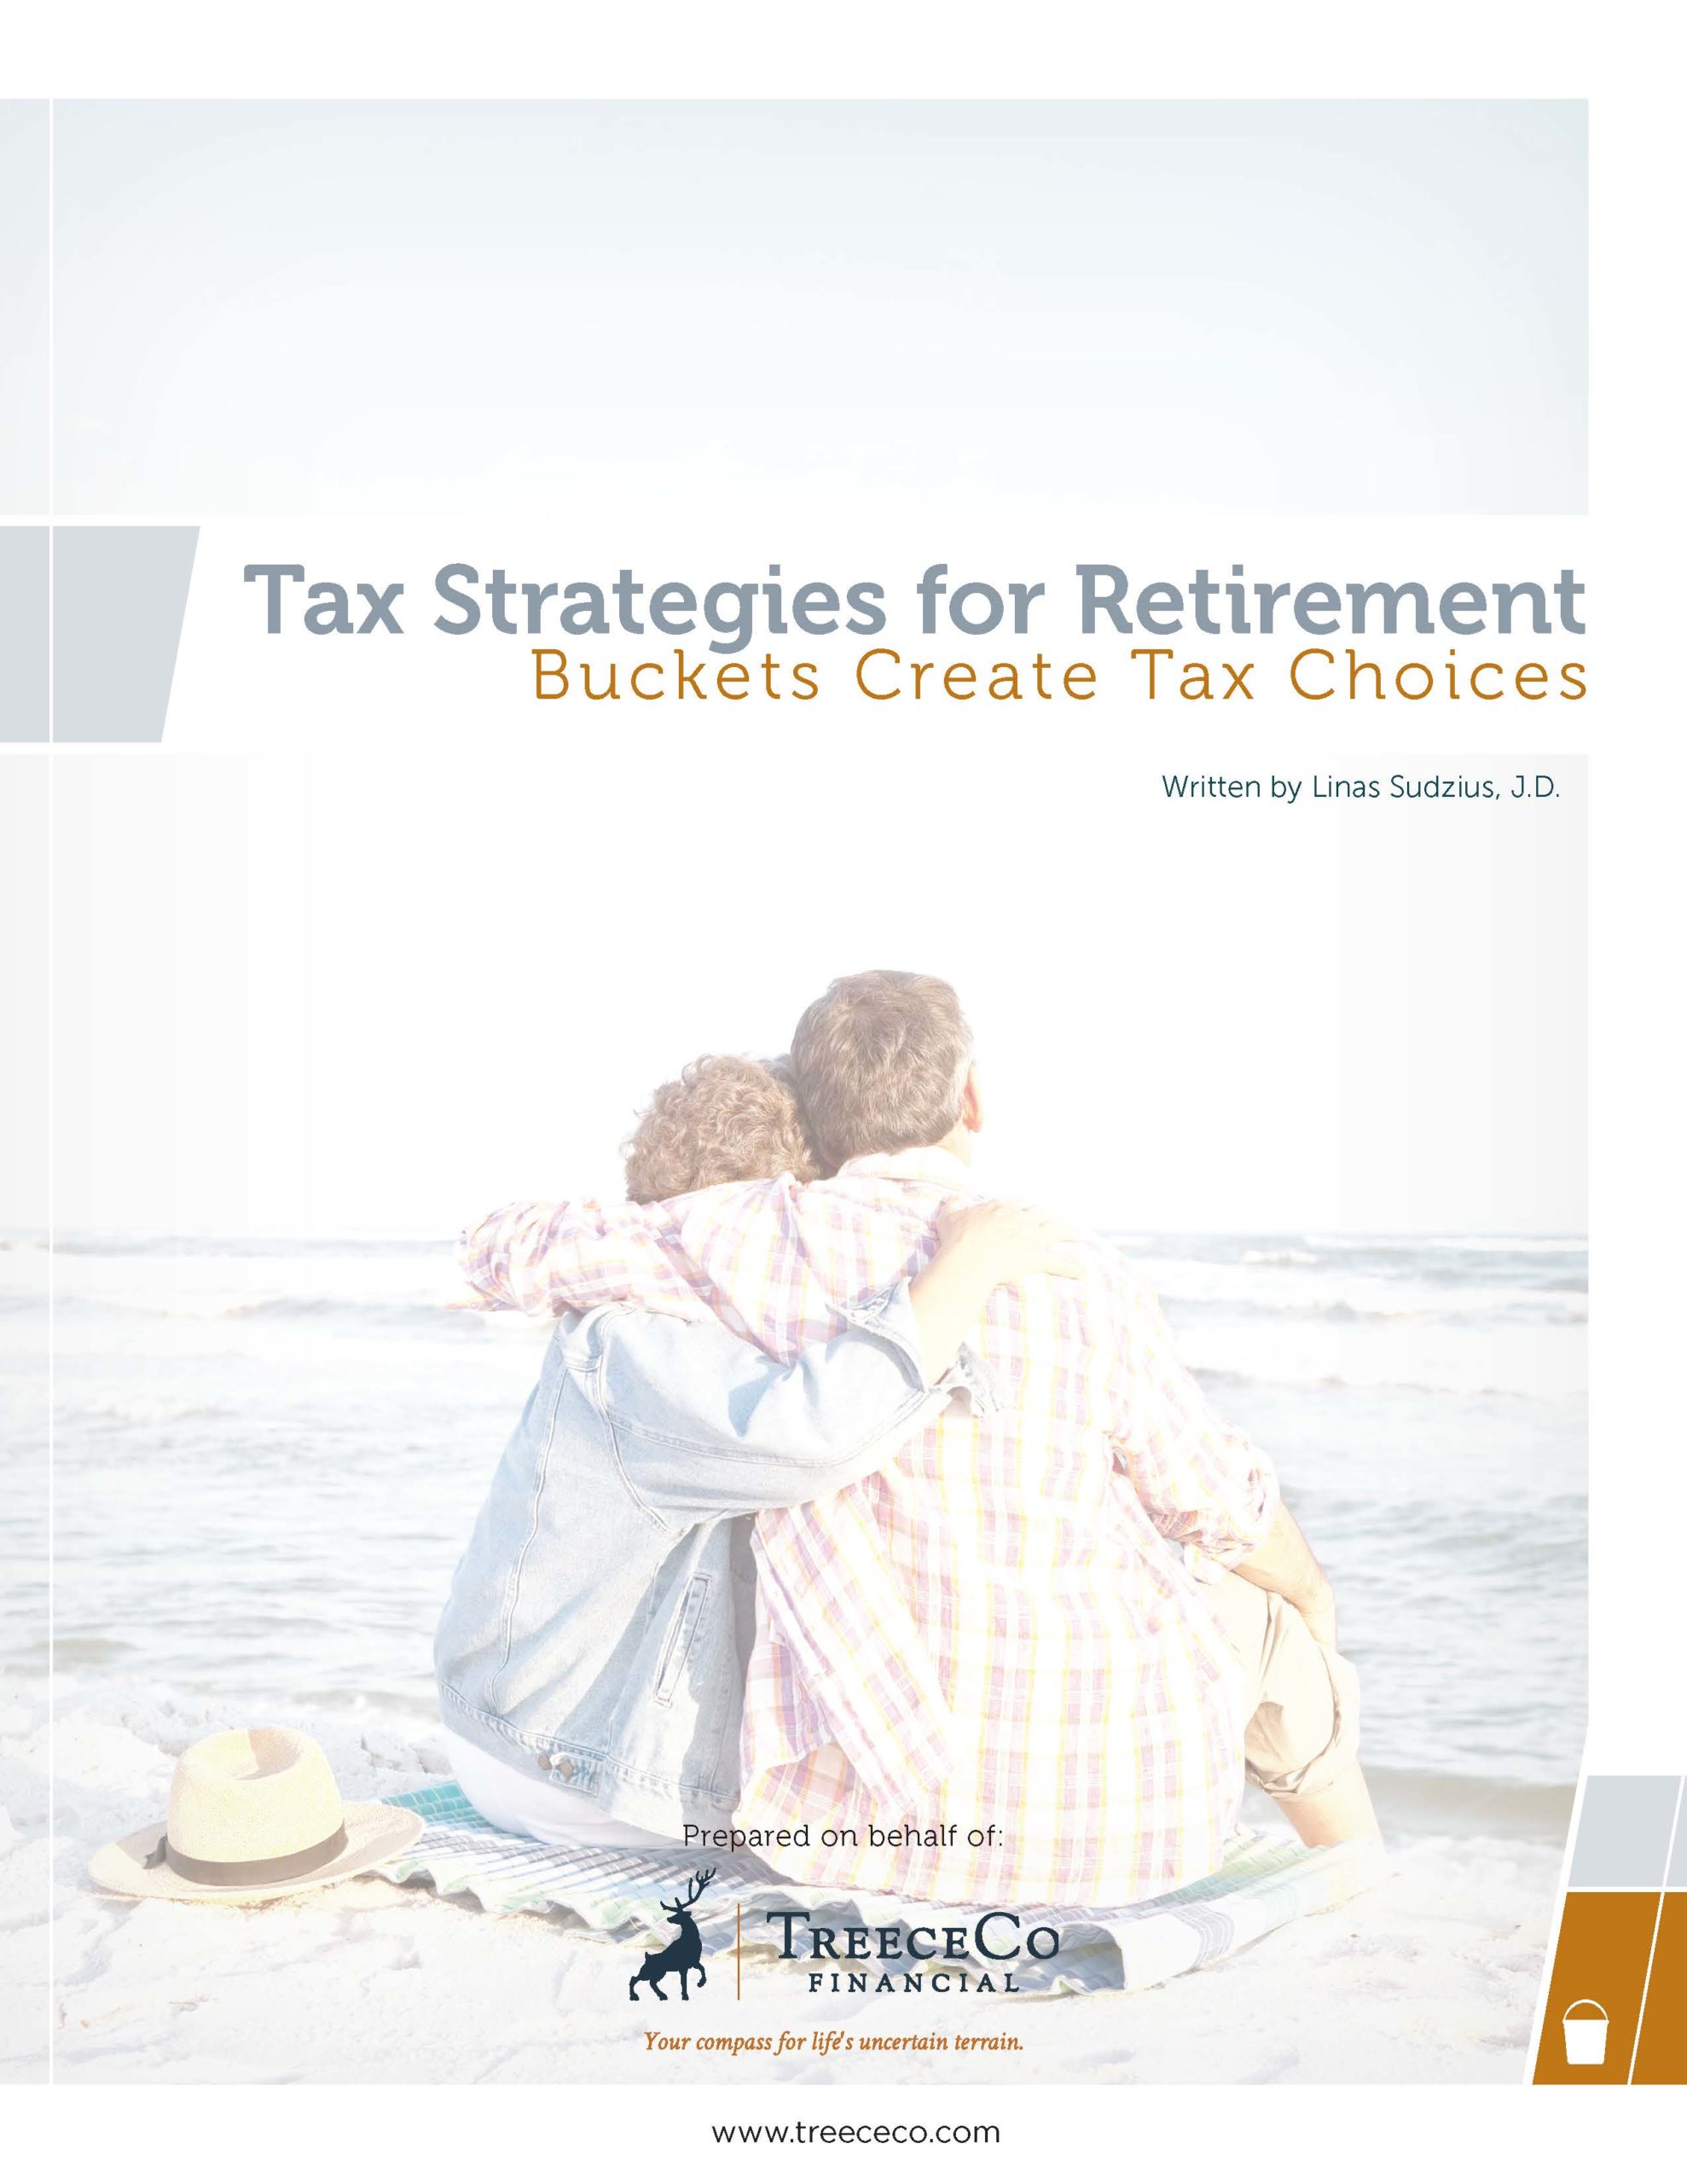 Treece_Tax Strategies for Retirement_whitepaper_MN_4.25.22_Page_01